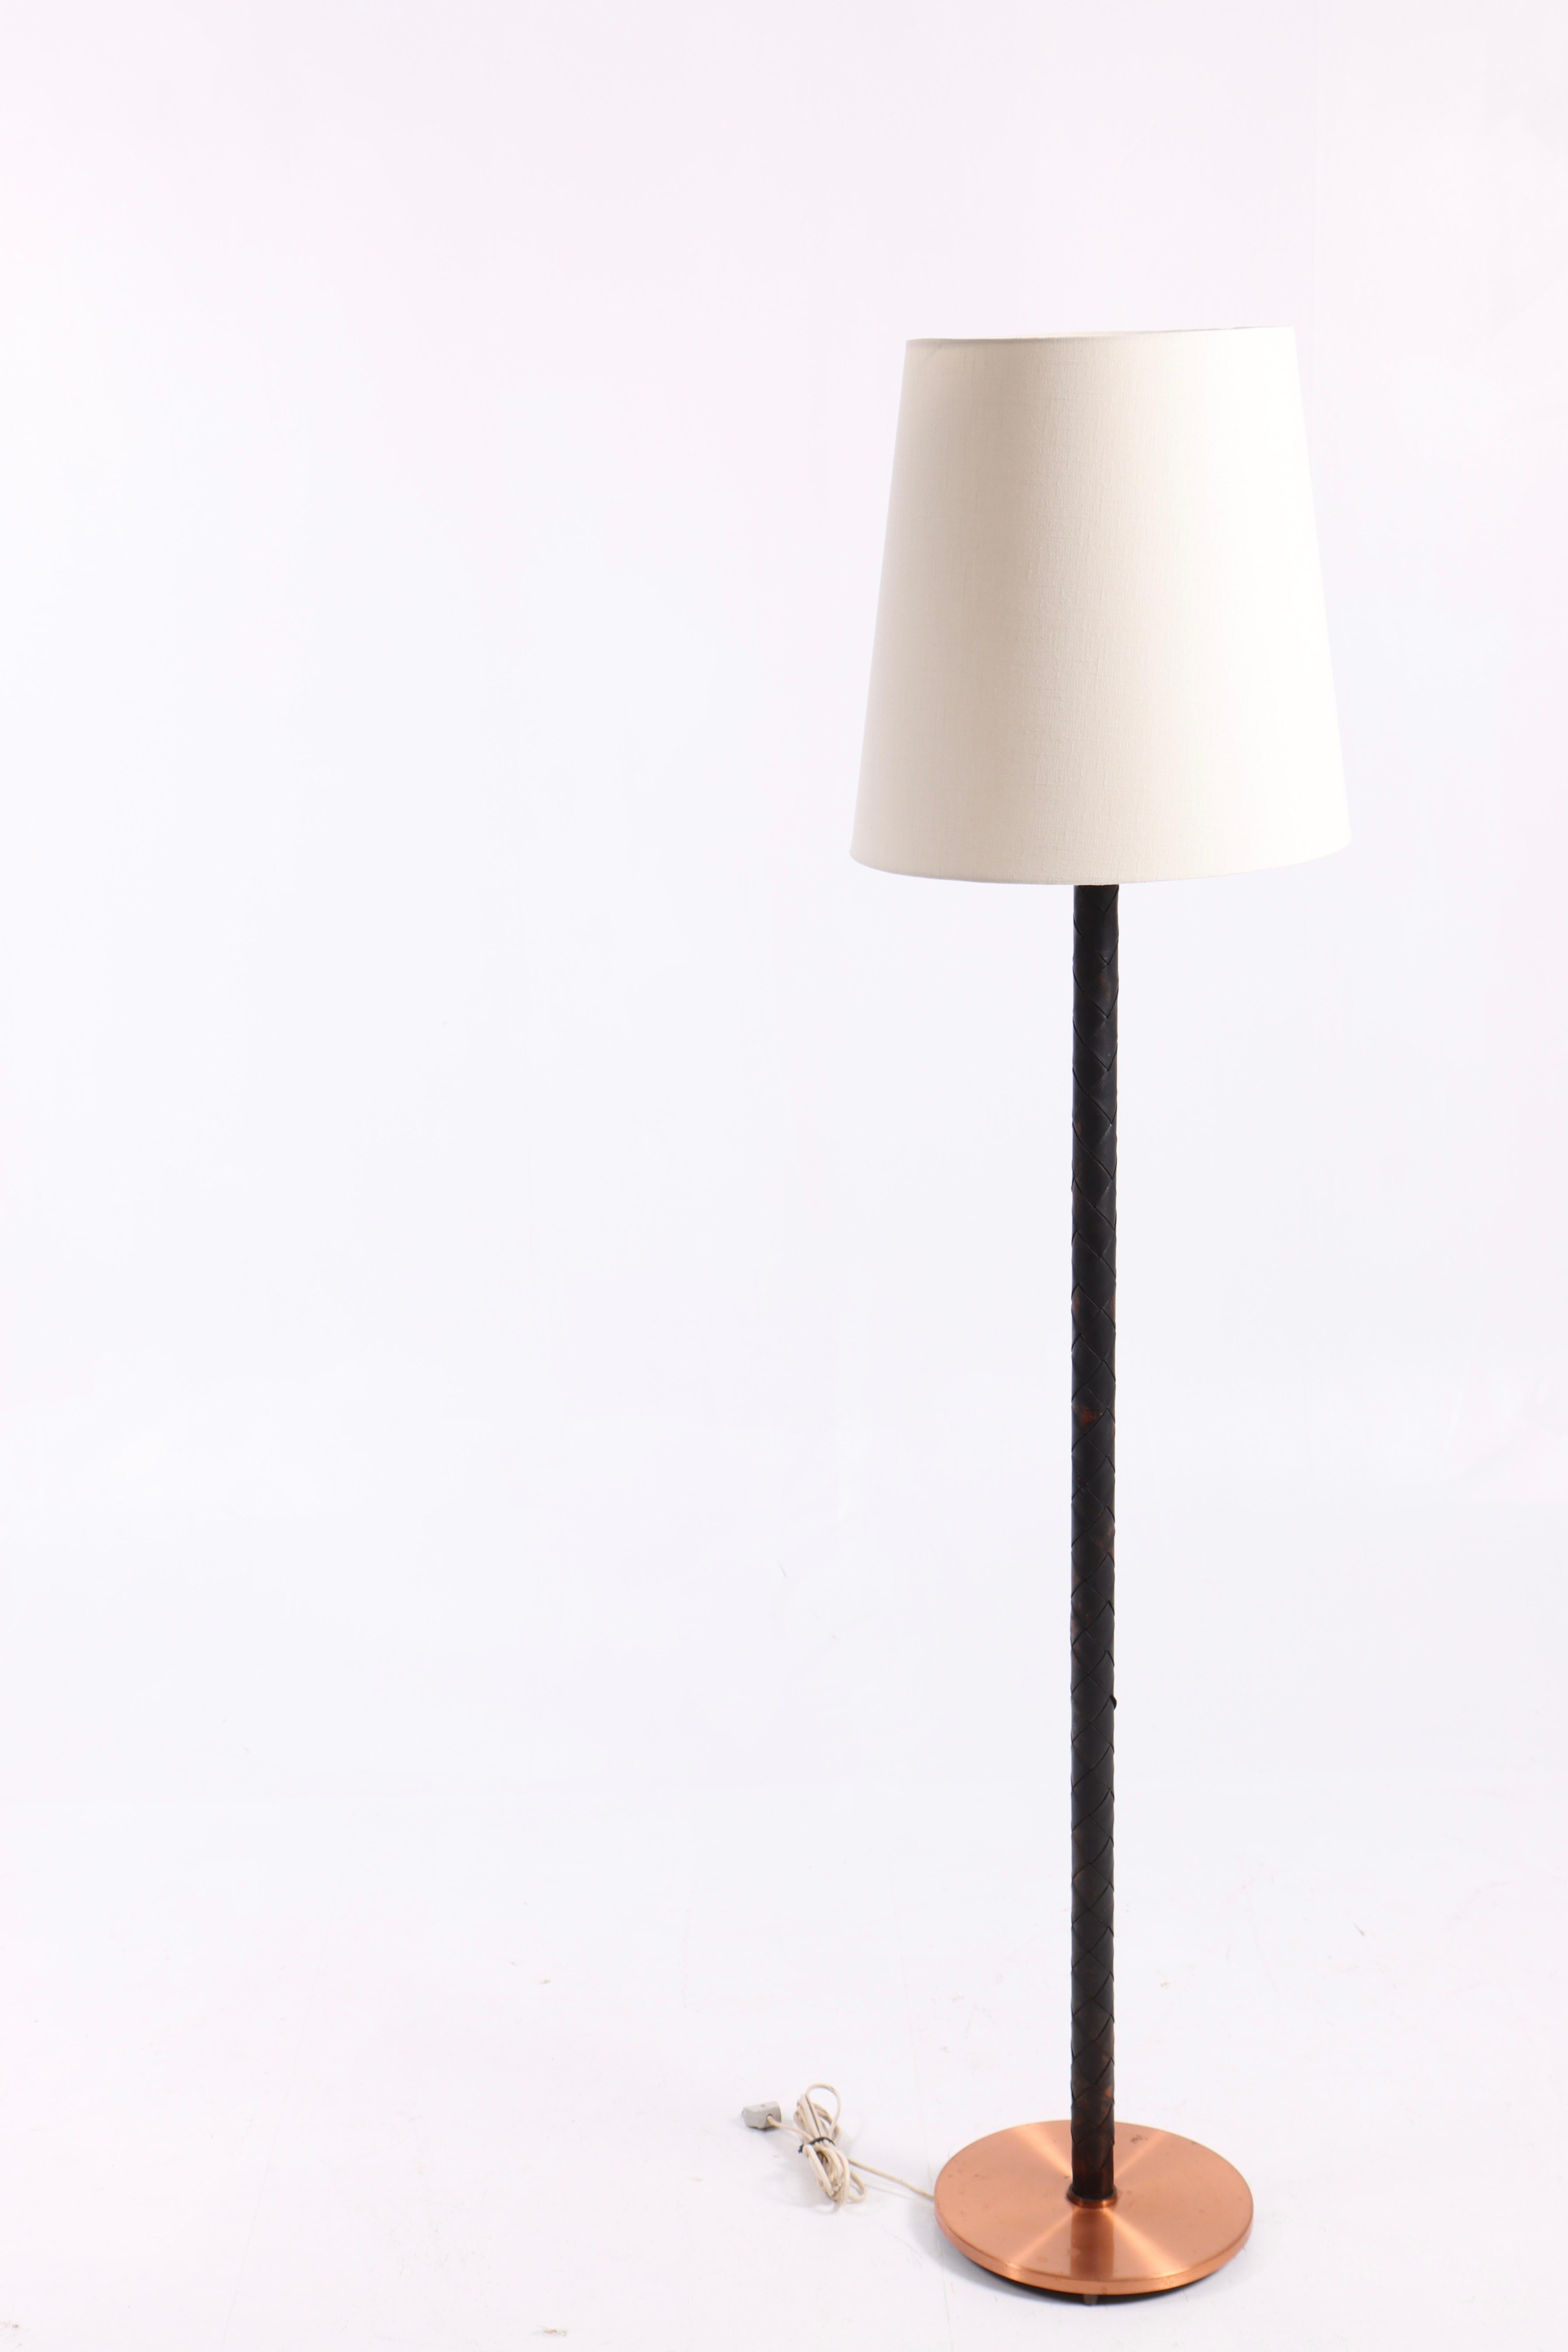 Mid-20th Century Floor Lamp in Copper and Leather Designed by Jo Hammerborg, 1950s For Sale